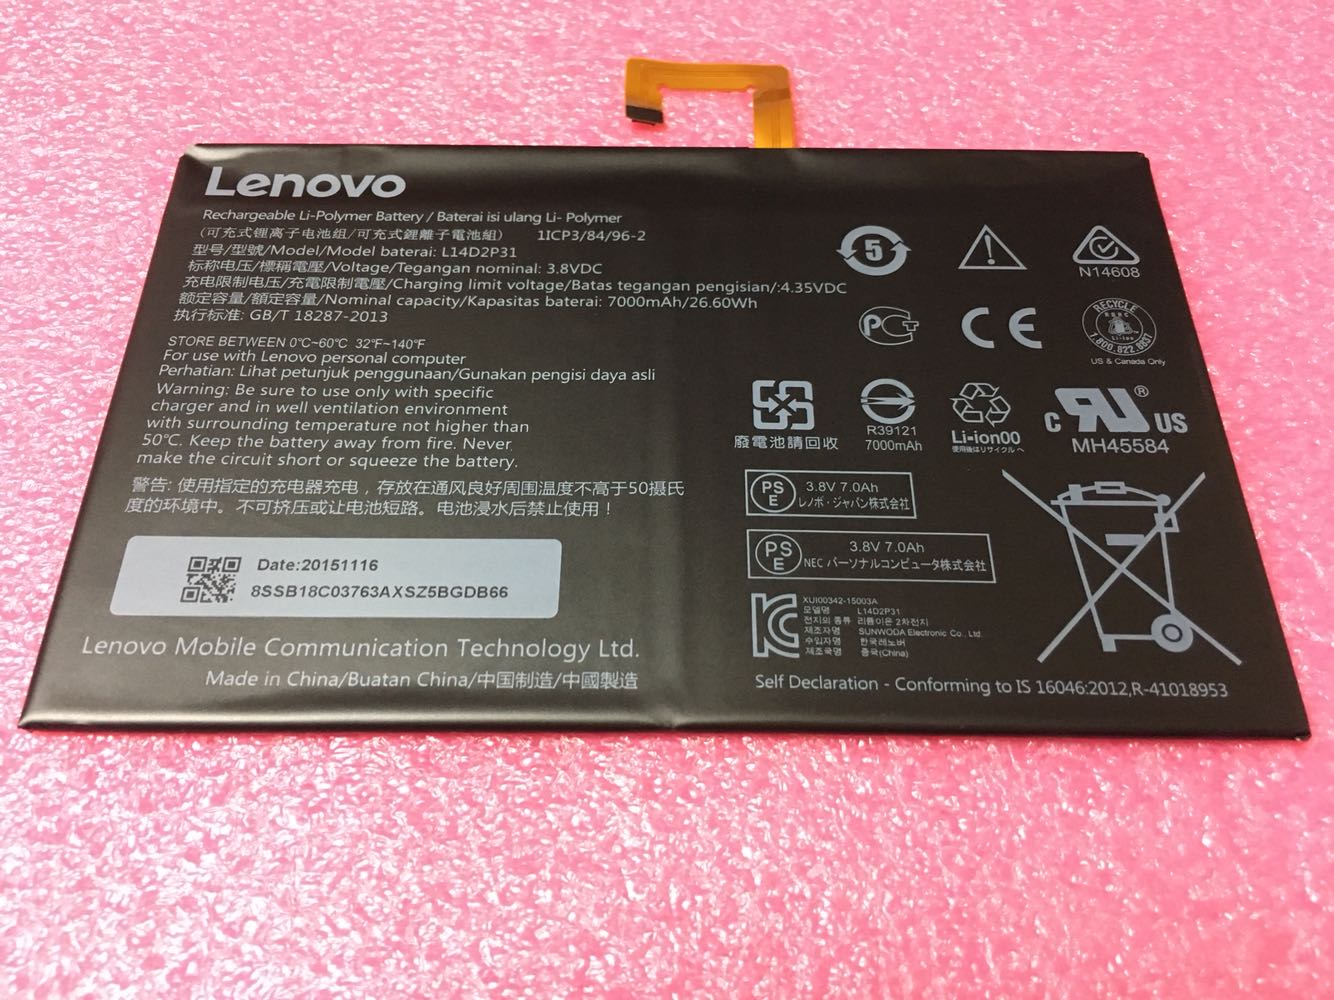 Genuine Replace Lenovo L14D2P31 Battery For Tab 2 X30F X30M A10-70F 3.8V 7.0Ah